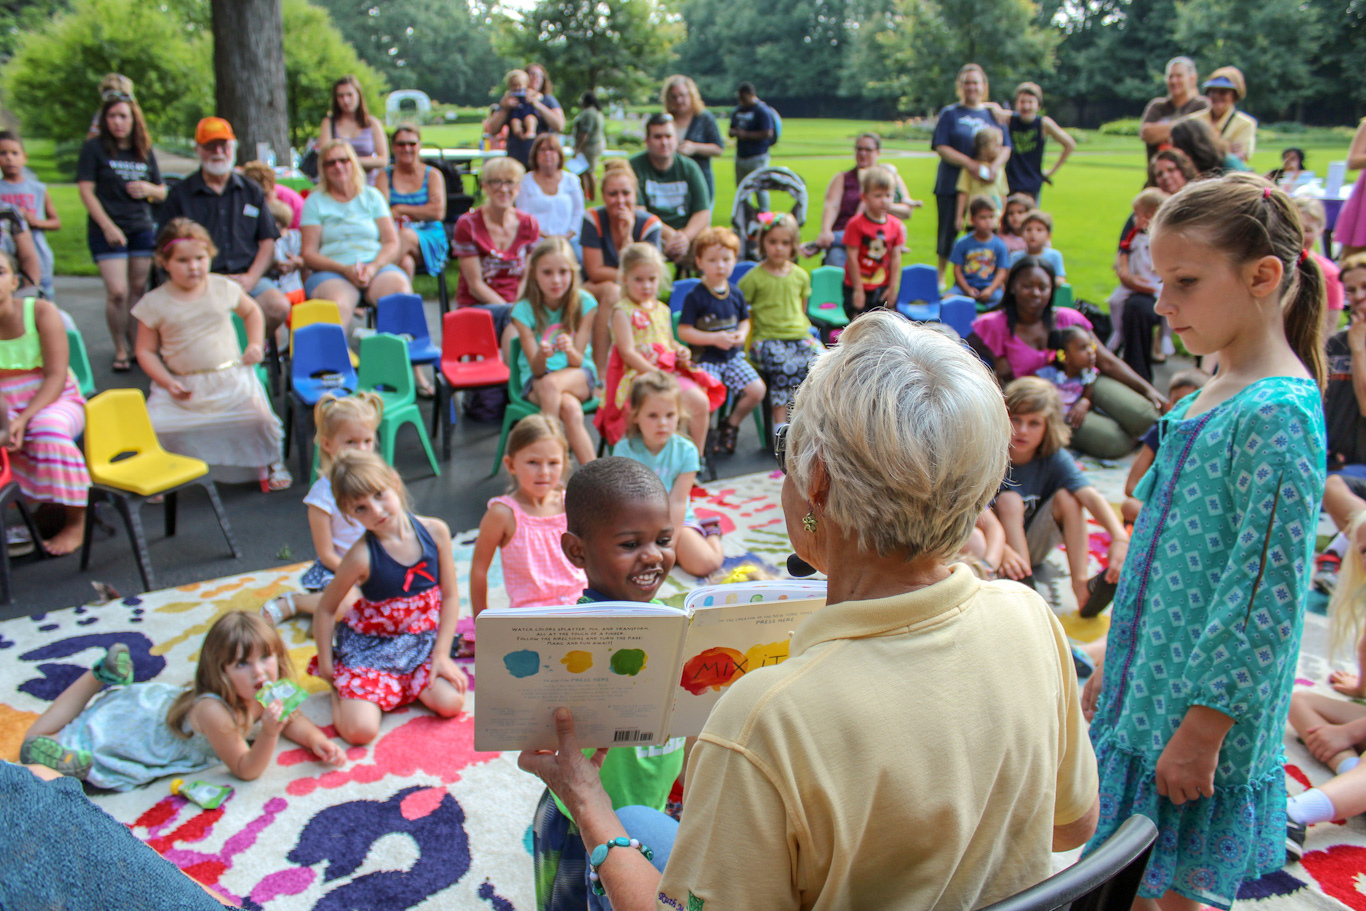 A group of young children are gathered outside on a colorful blanket. A woman not facing the camera is holding up a book during story time.